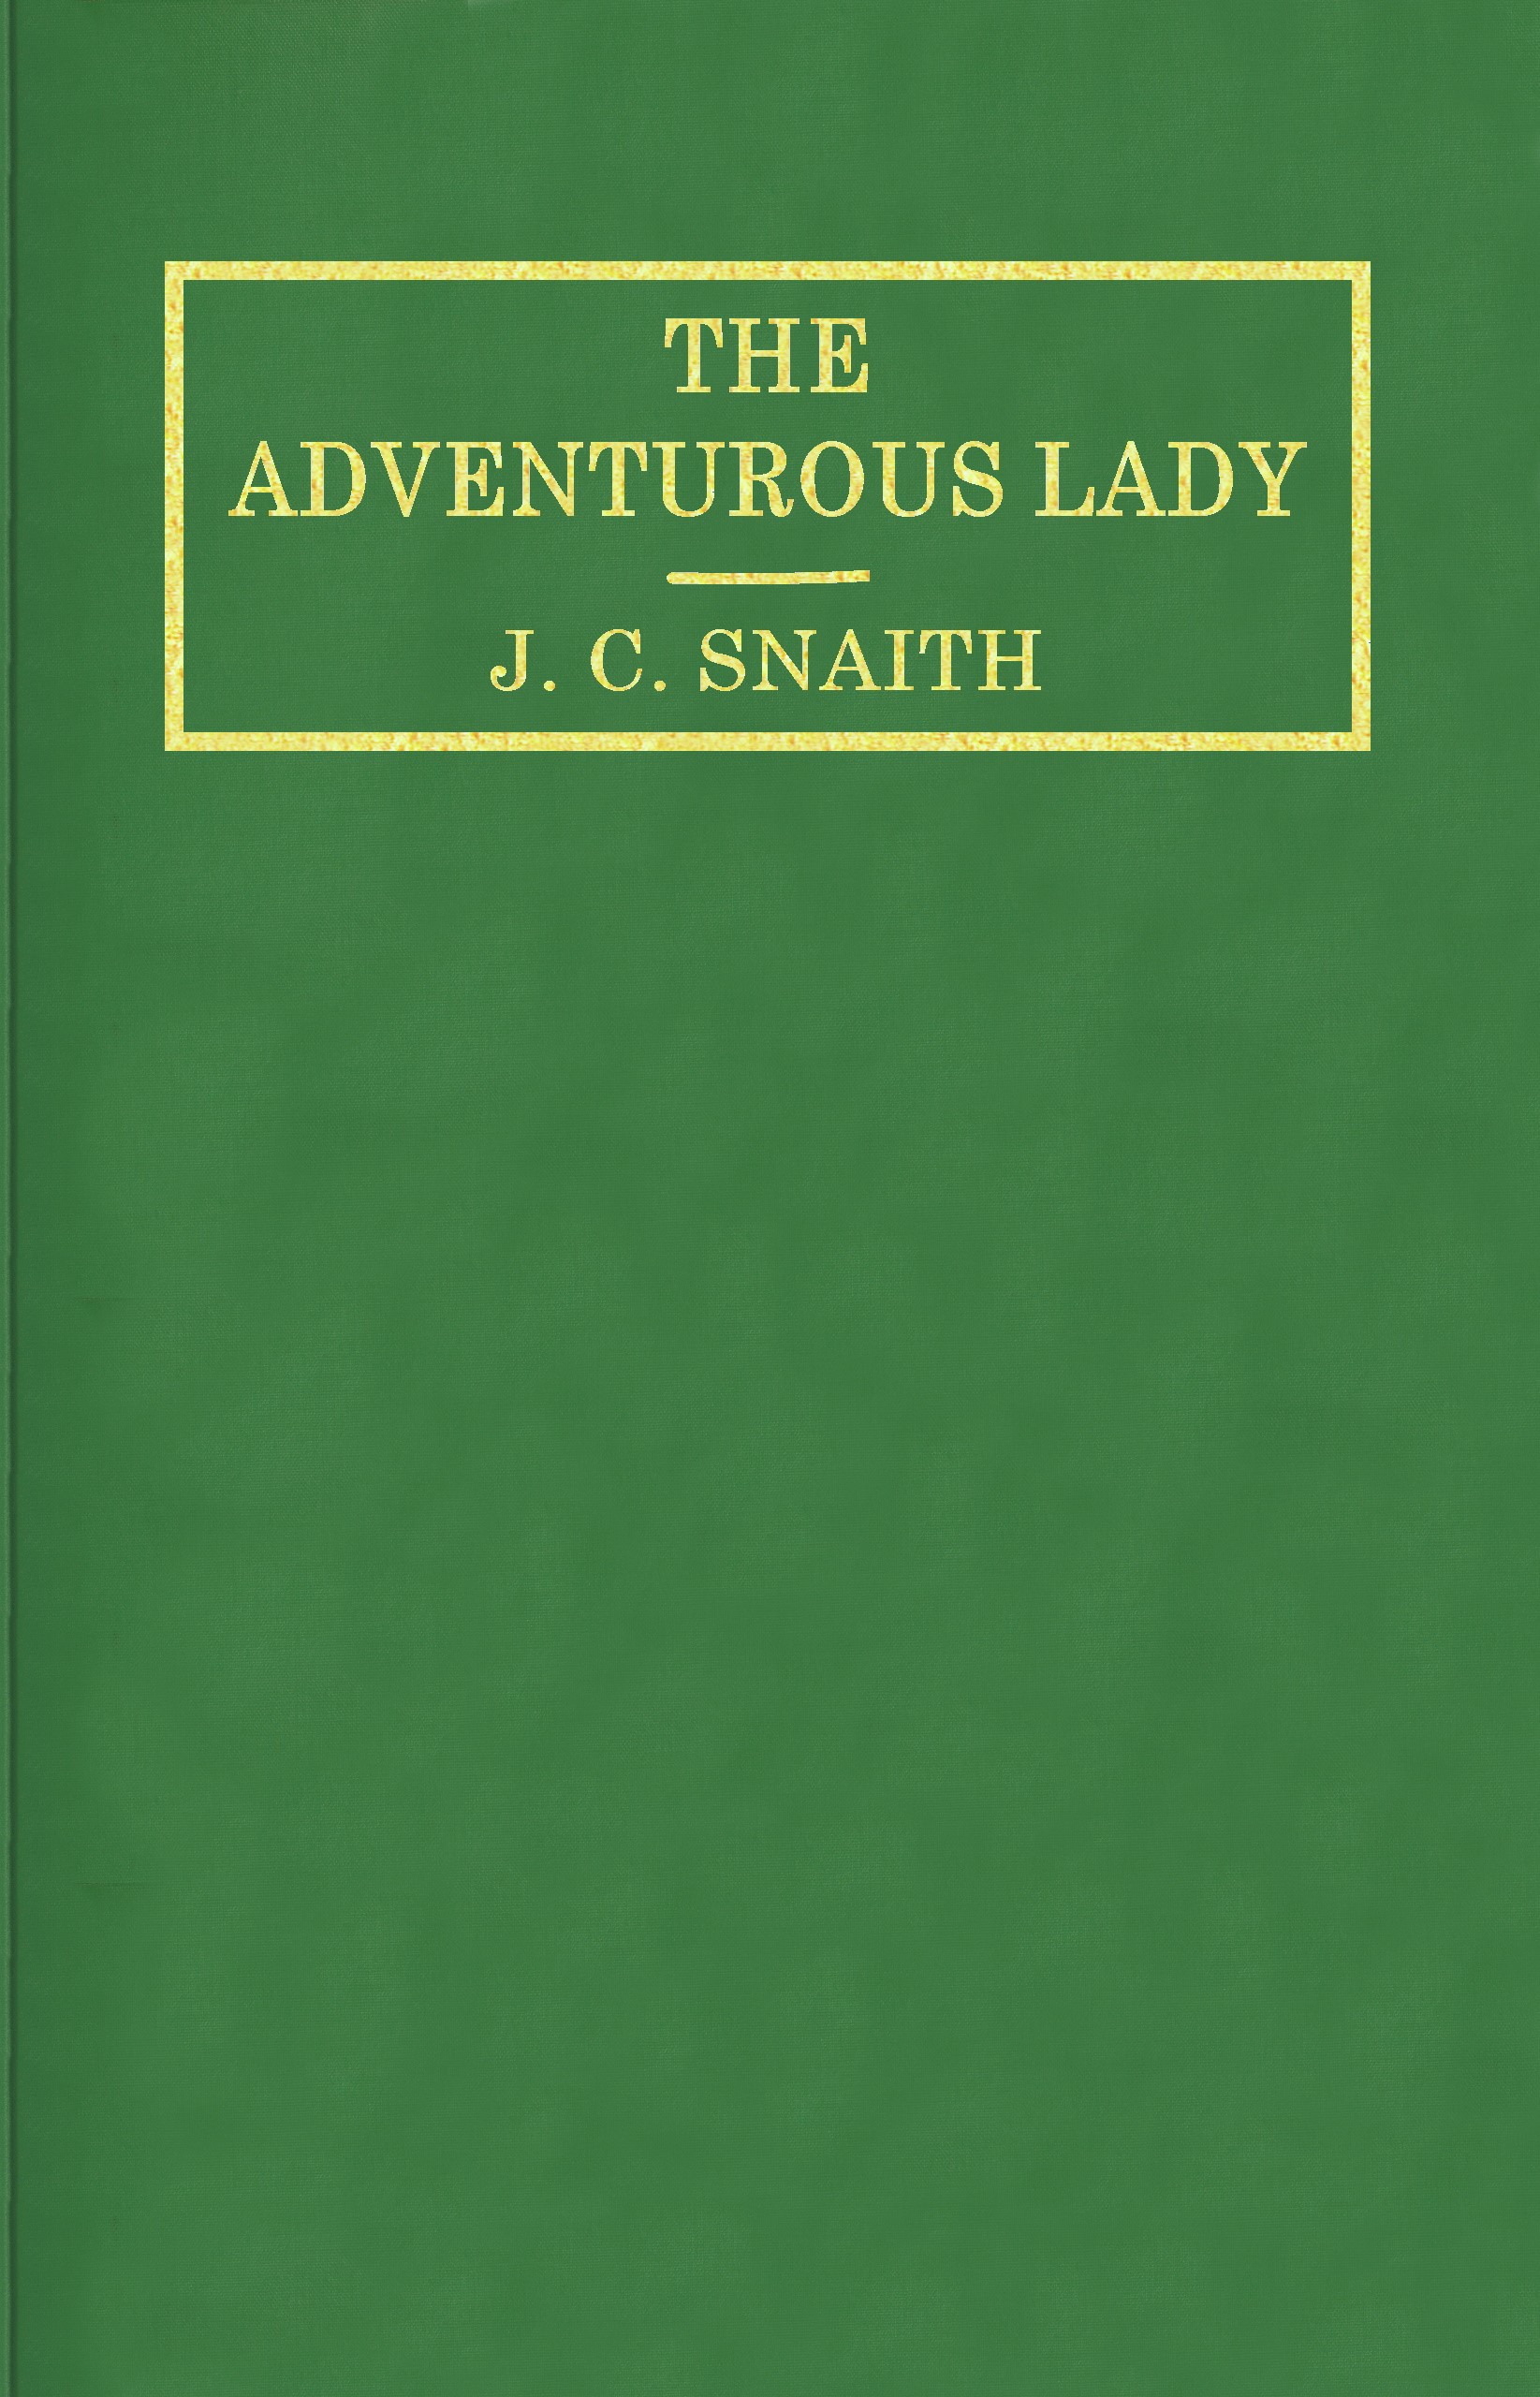 The Adventurous Lady, by J pic